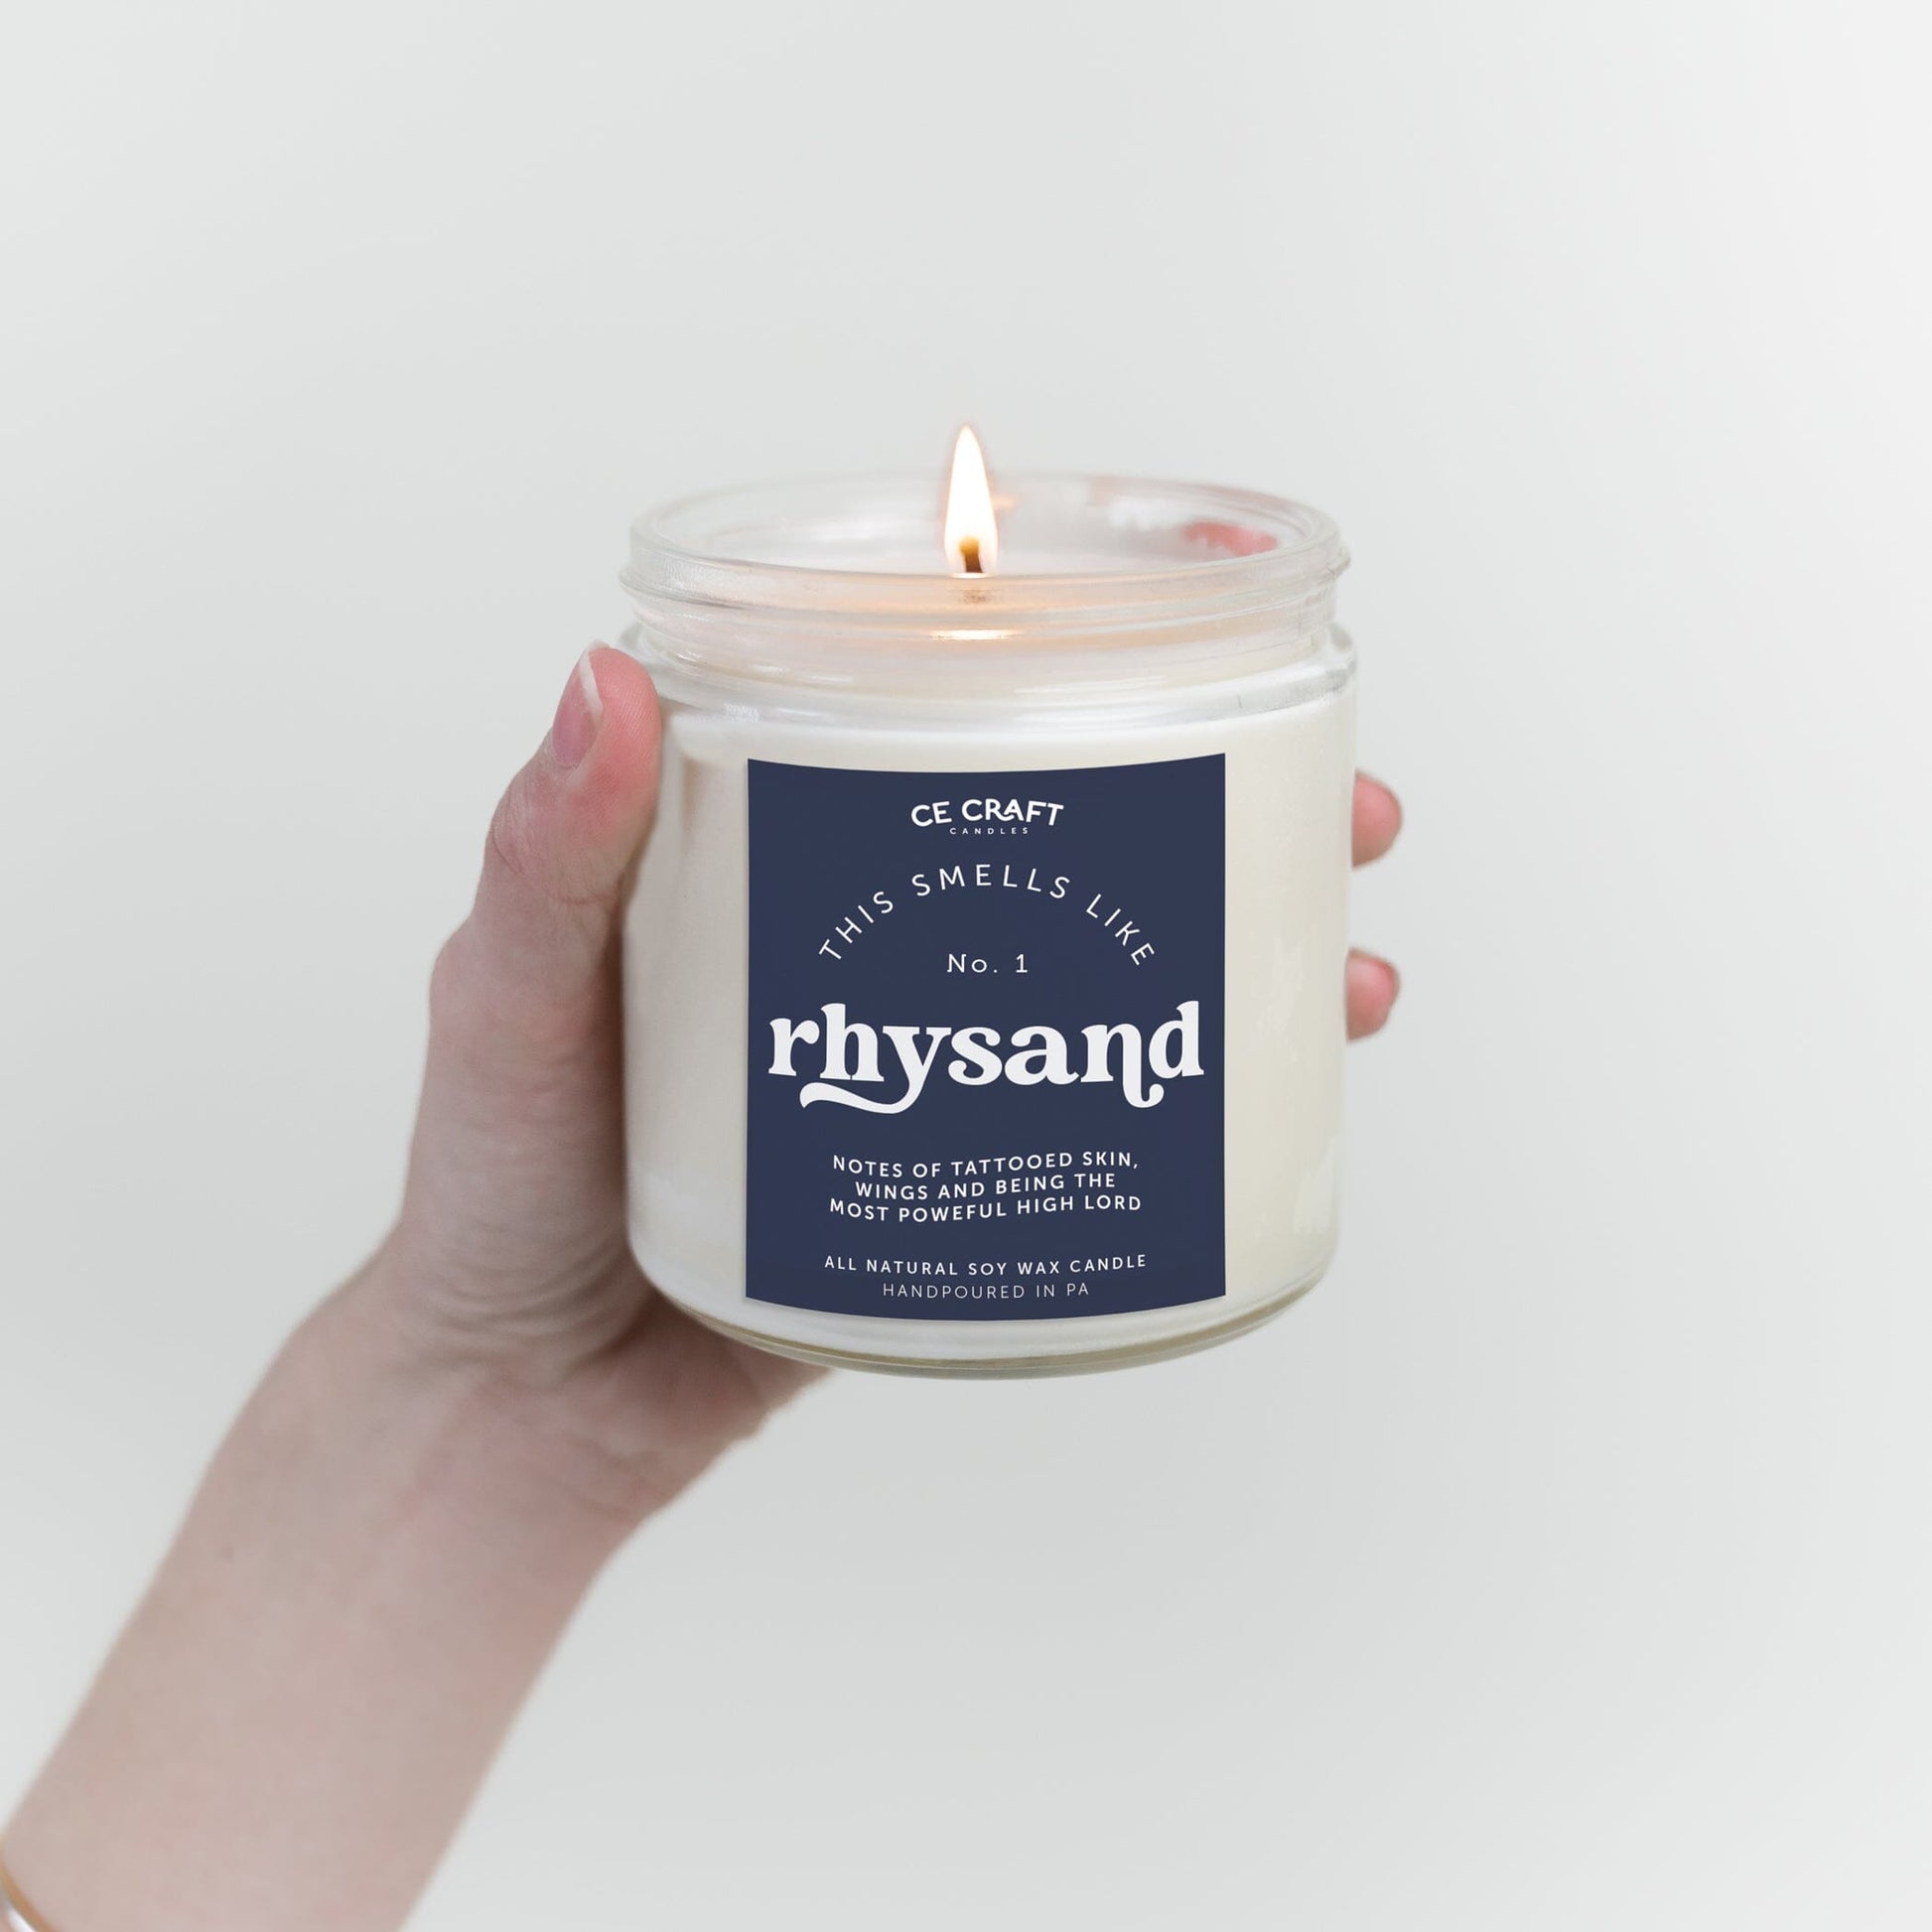 This Smells Like Rhysand Candle CE Craft Large 